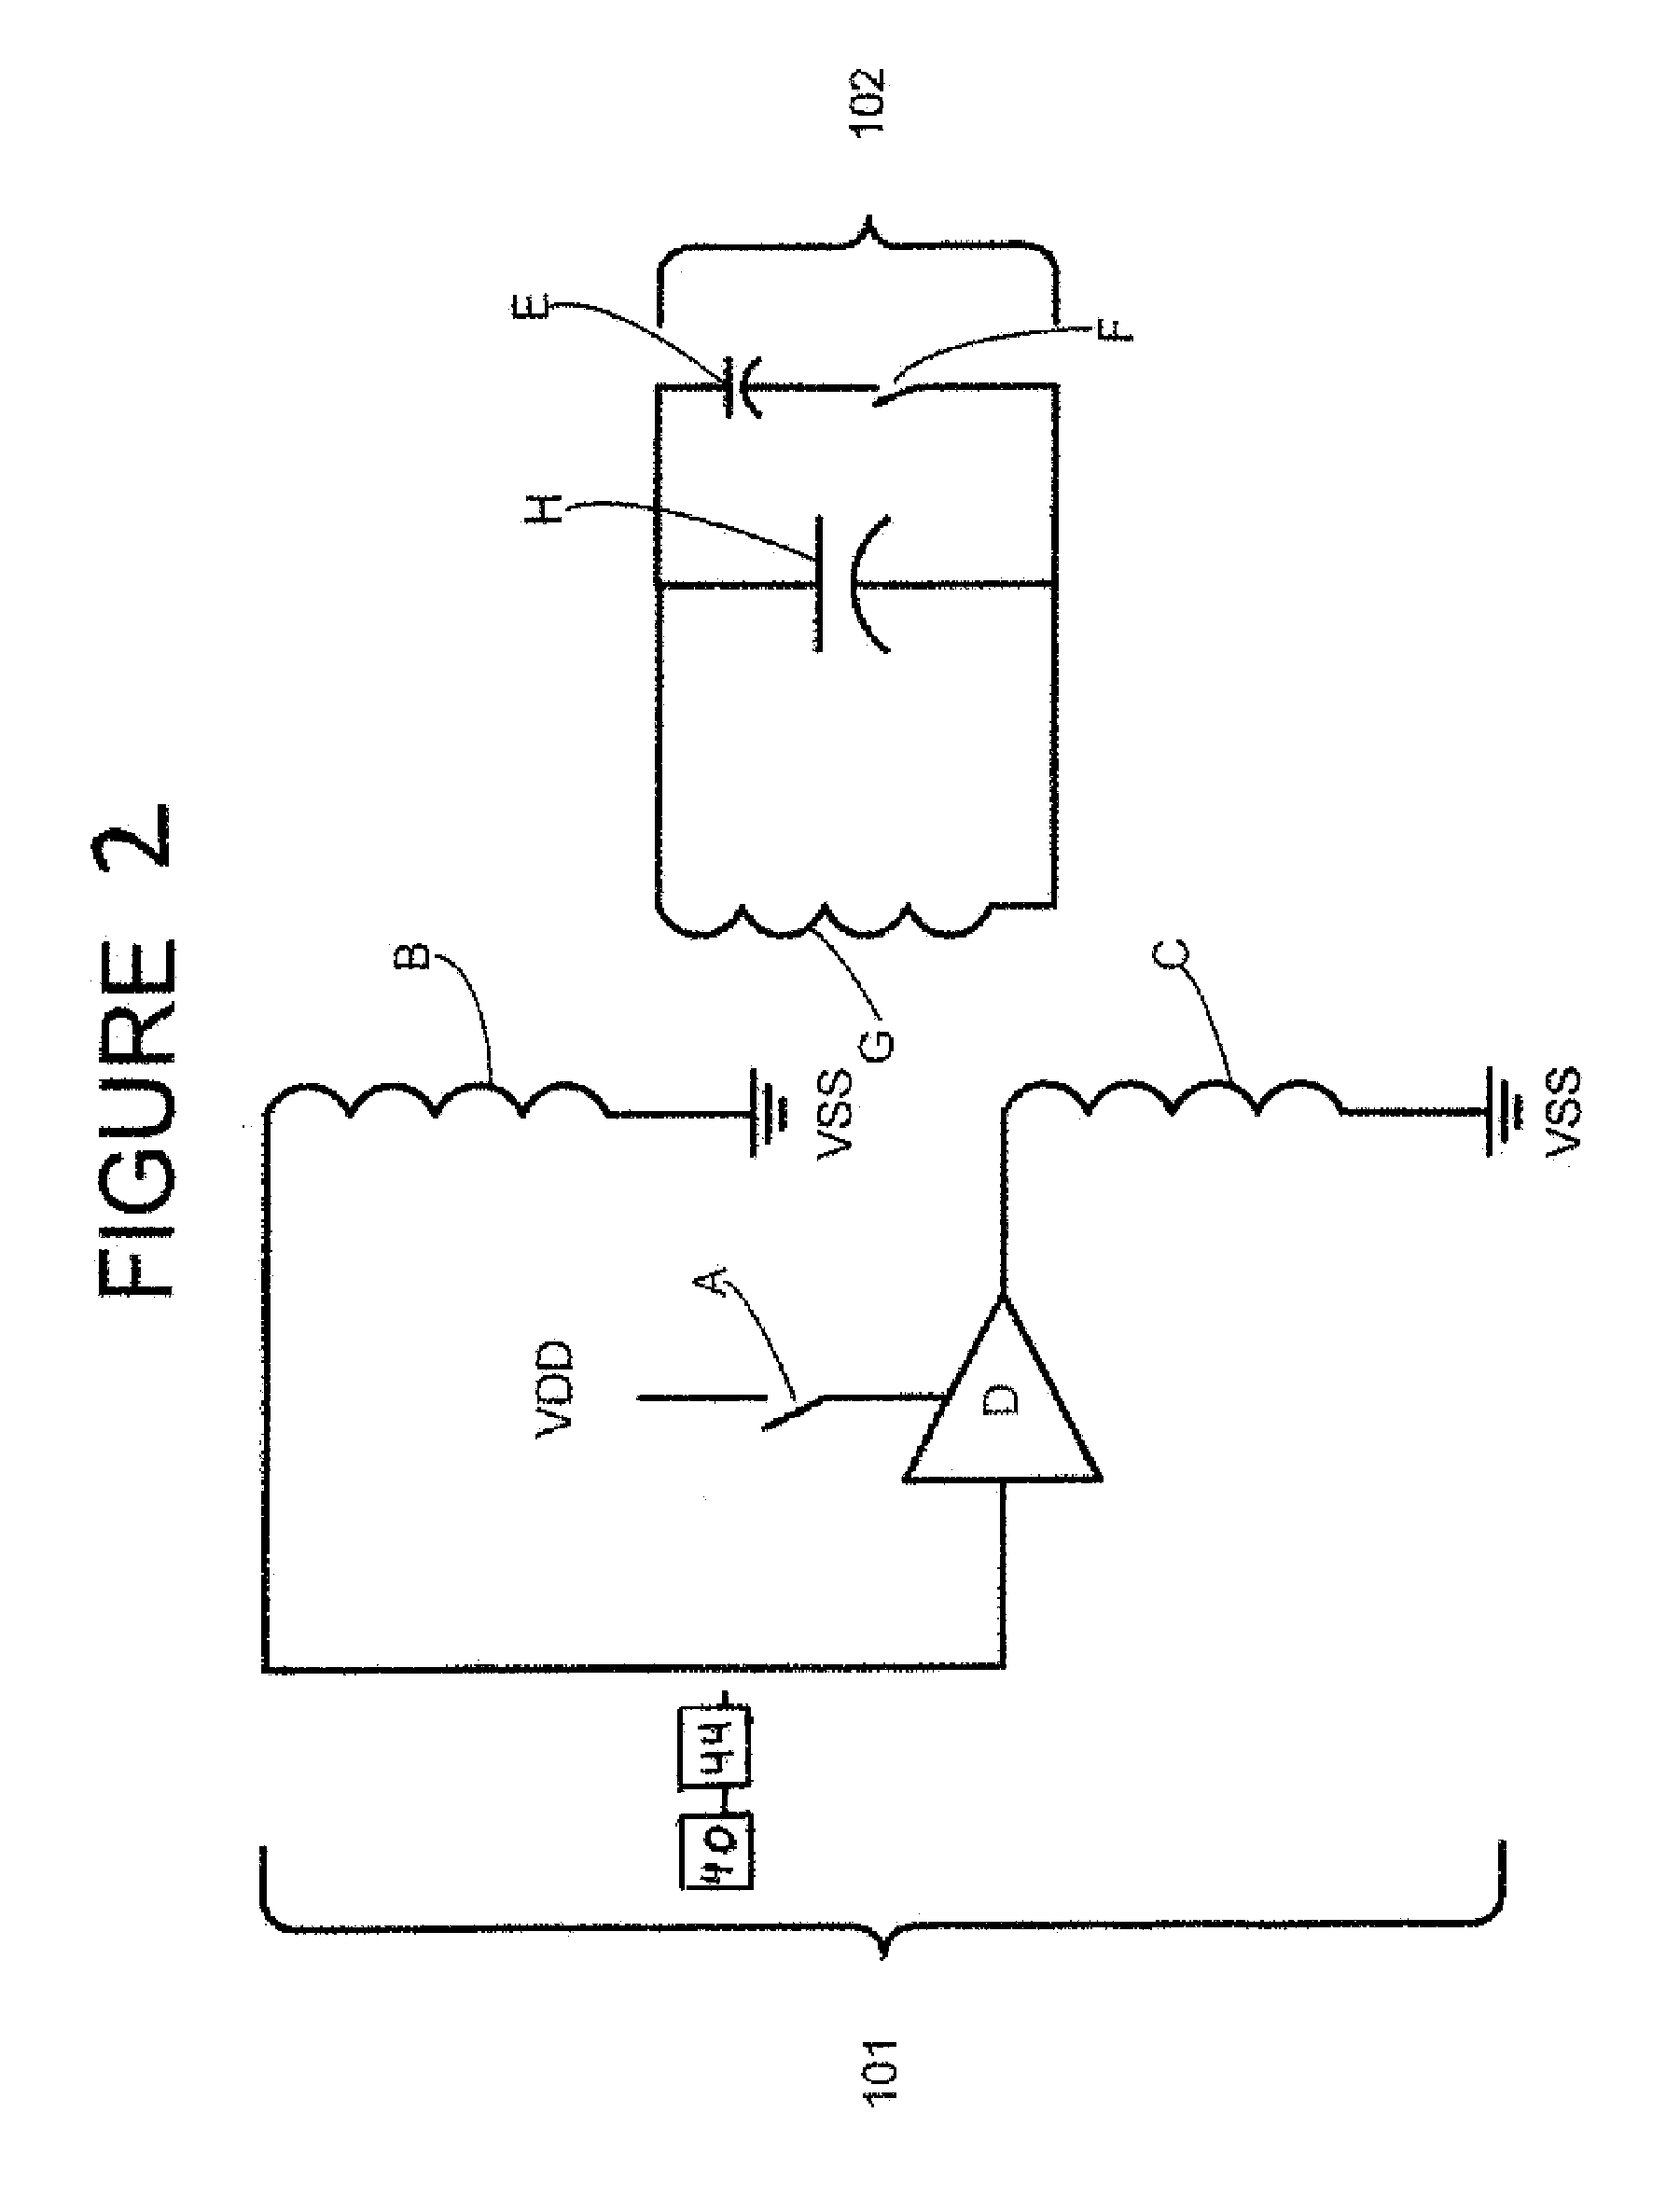 System and method for communication between a fluid filtration apparatus and filter